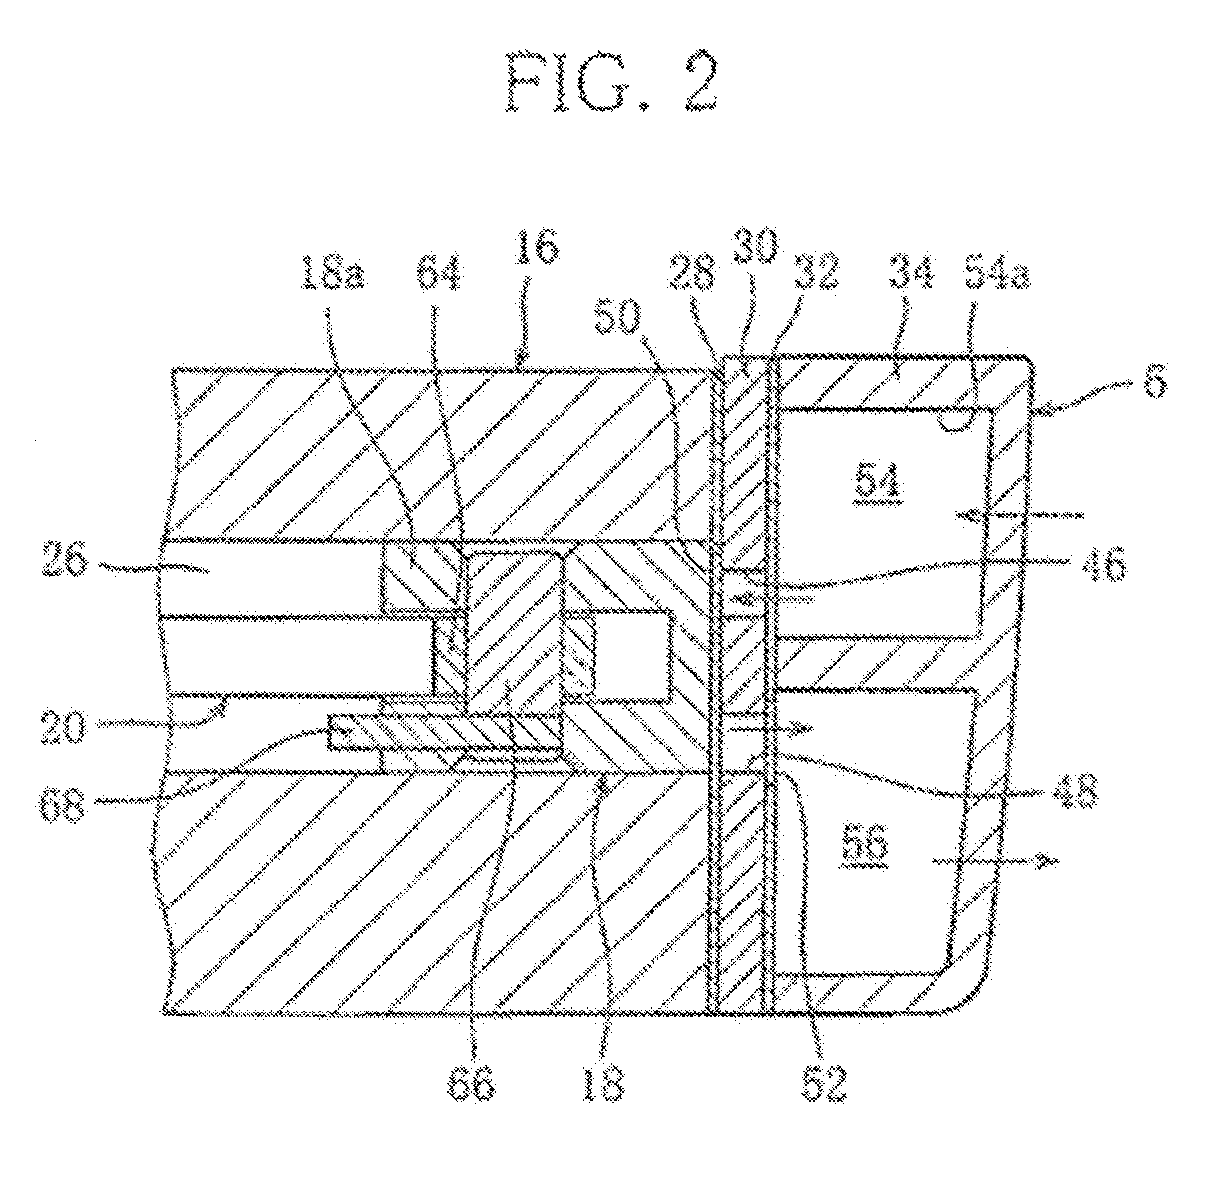 Fluid machine provided with hermetic container that is subjected to pressure of working fluid